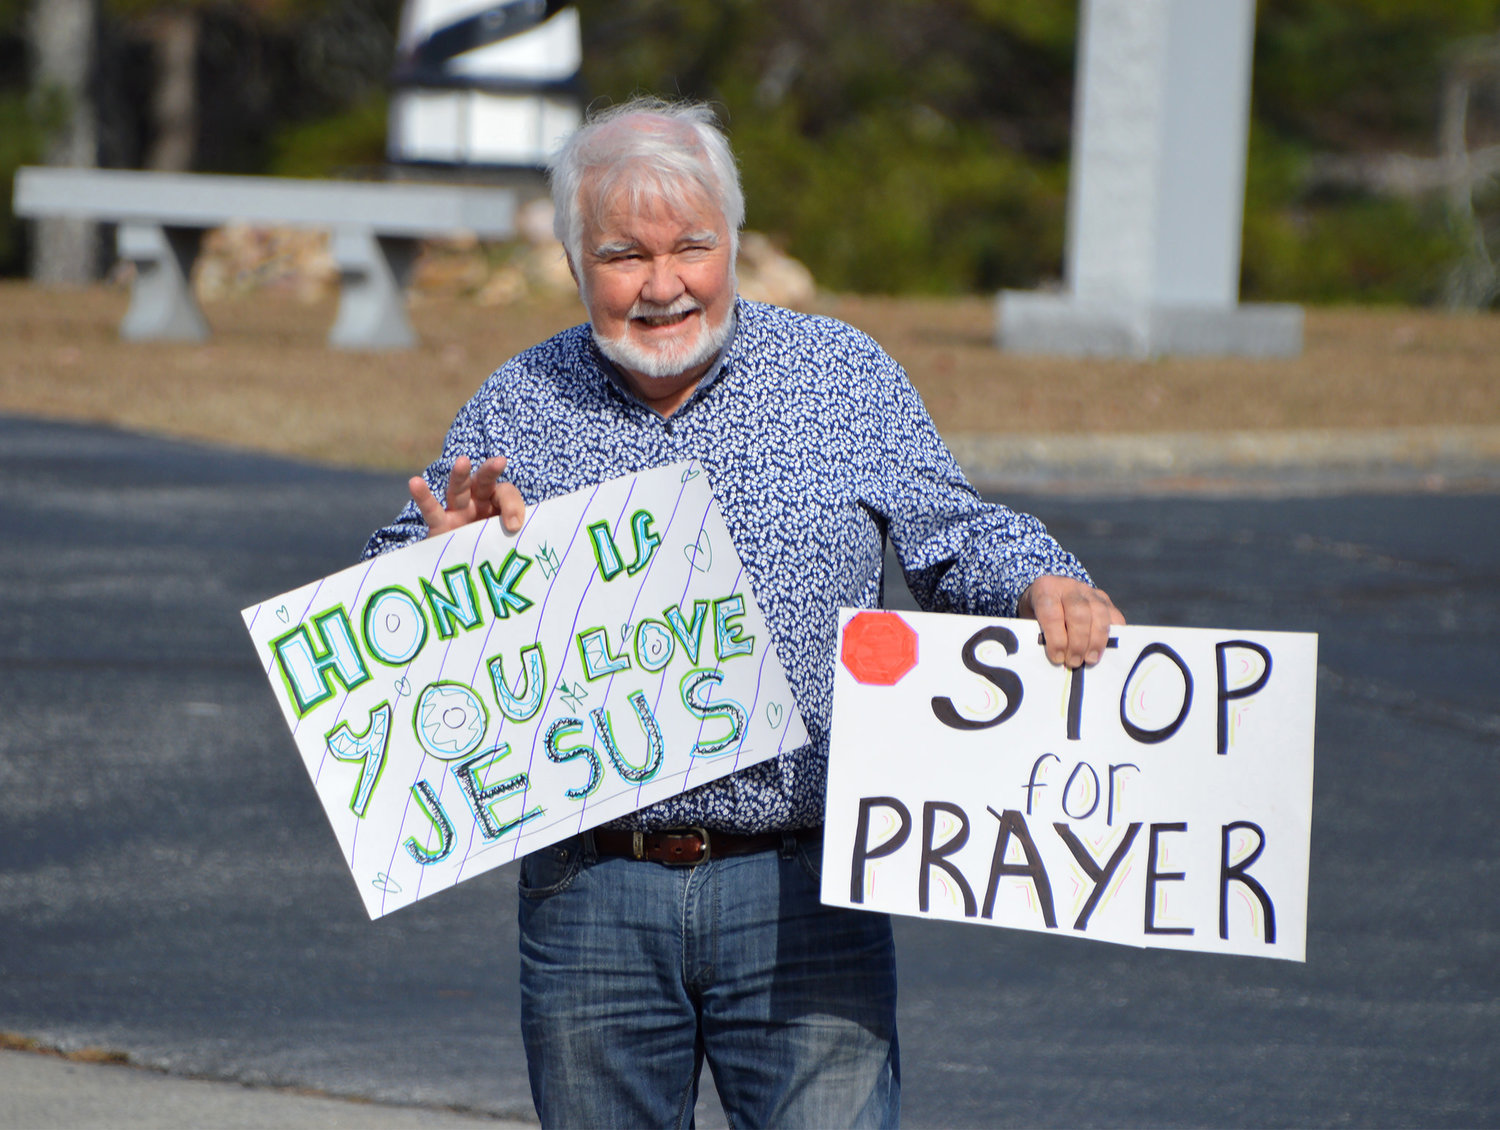 Bill Lloyd waves to a honking motorist while holding signs encouraging people to pull into New Hope First Baptist Church for drive-thru prayer on Saturday, Nov. 19, 2022, in Dallas, Ga. (Index/Henry Durand)